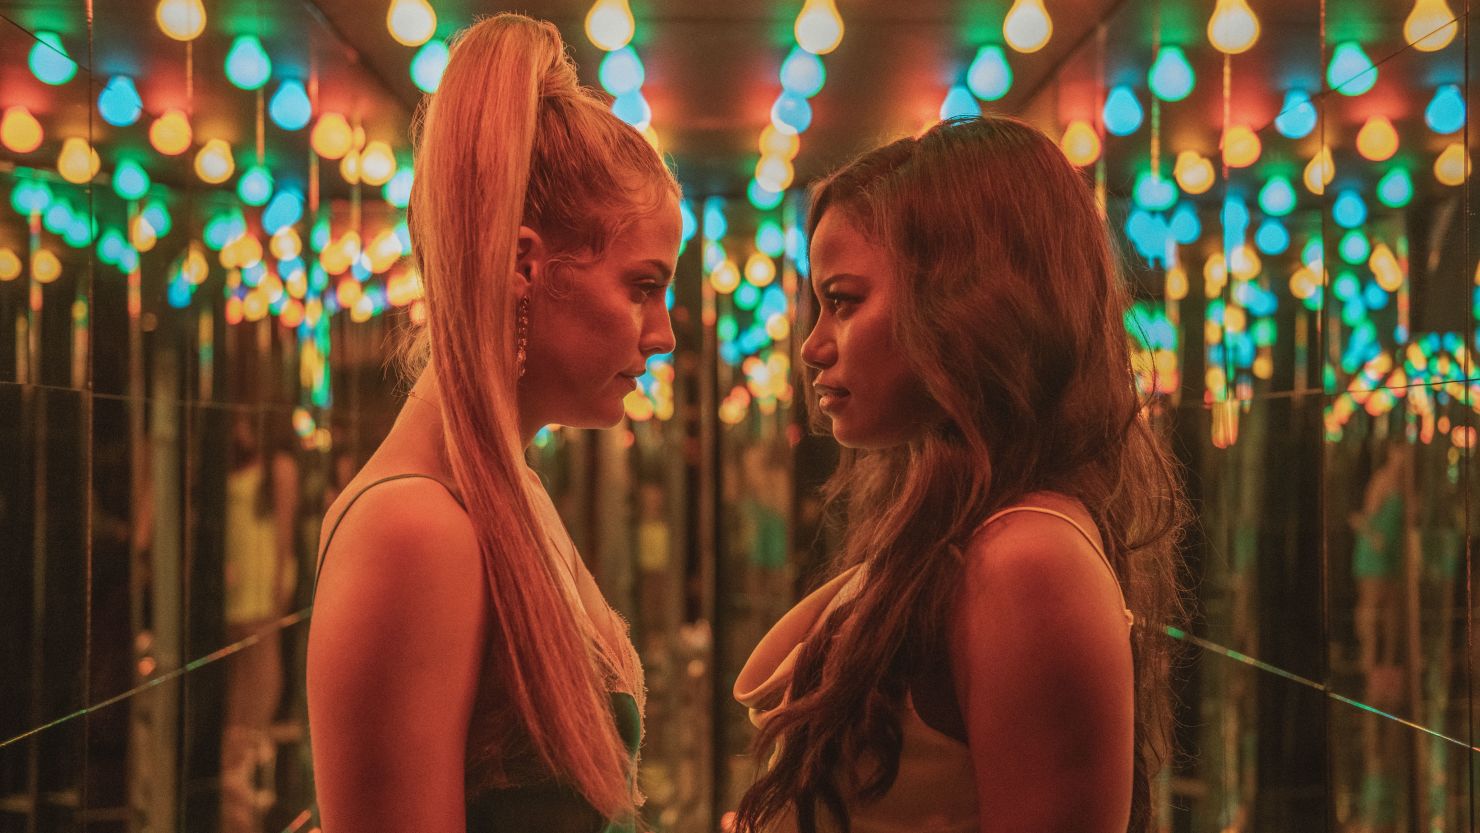 Riley Keough (left) stars as Stefani and Taylour Paige stars as Zola in director Janicza Bravo's "Zola."